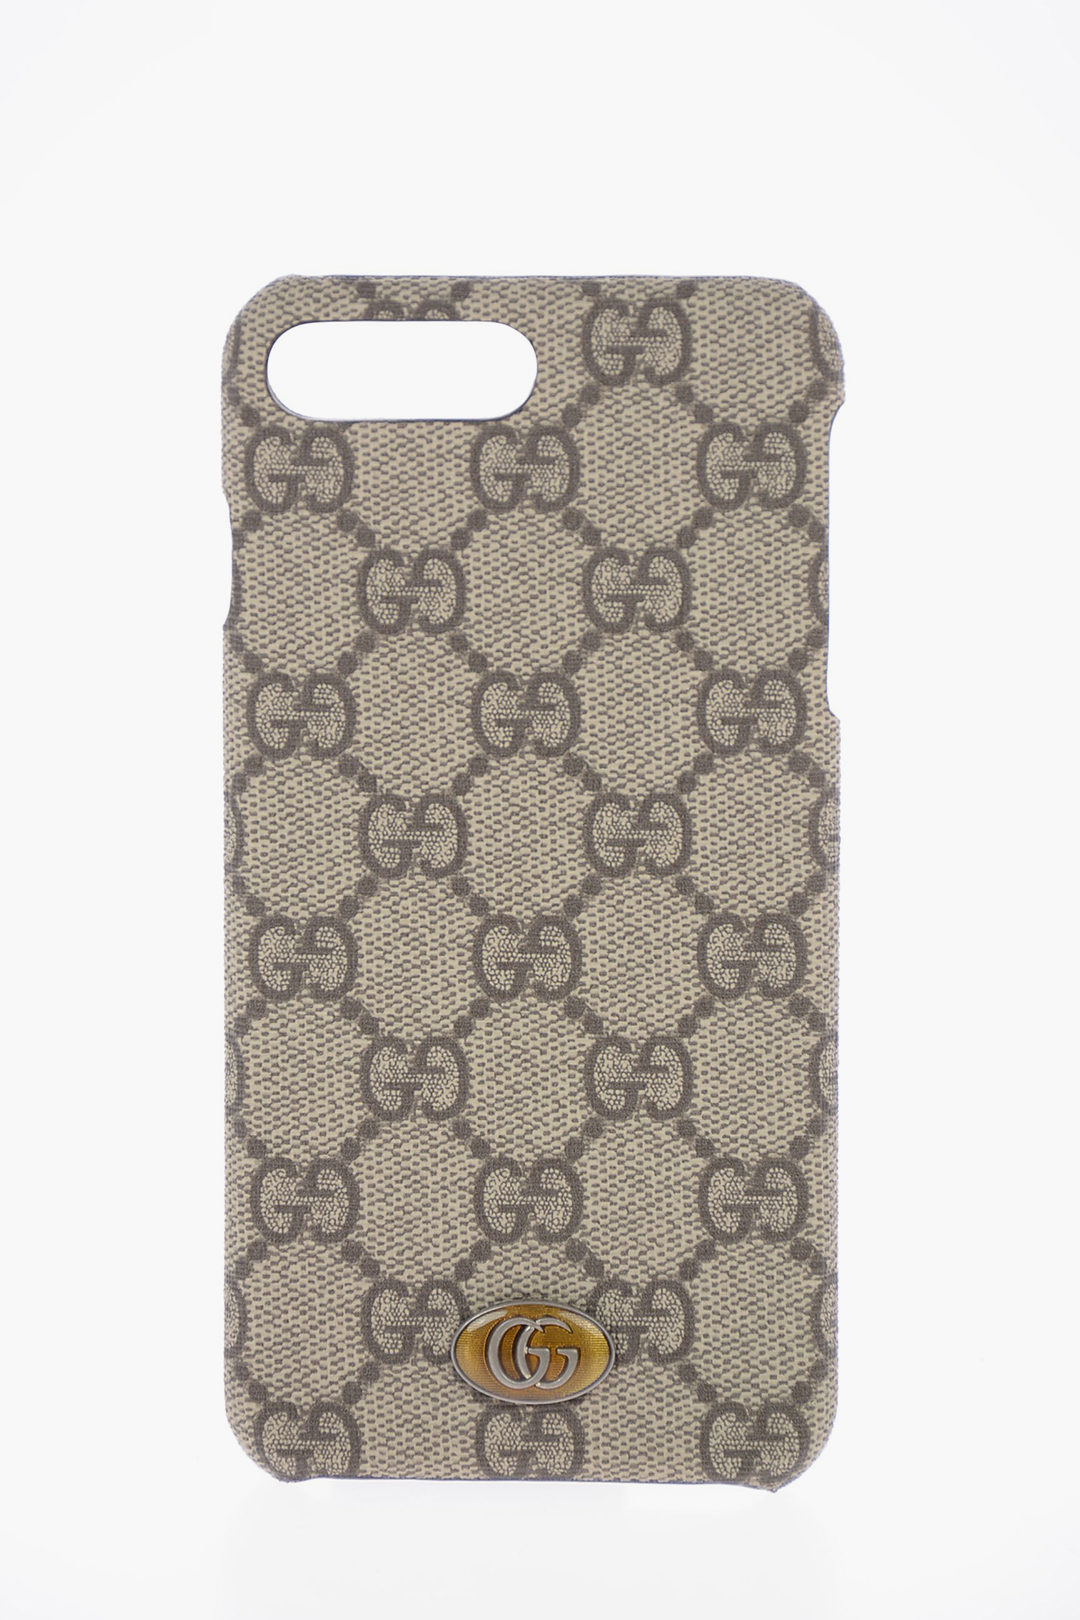 Gucci Logo Printed iPhone 8 PLUS Cover unisex women - Outlet